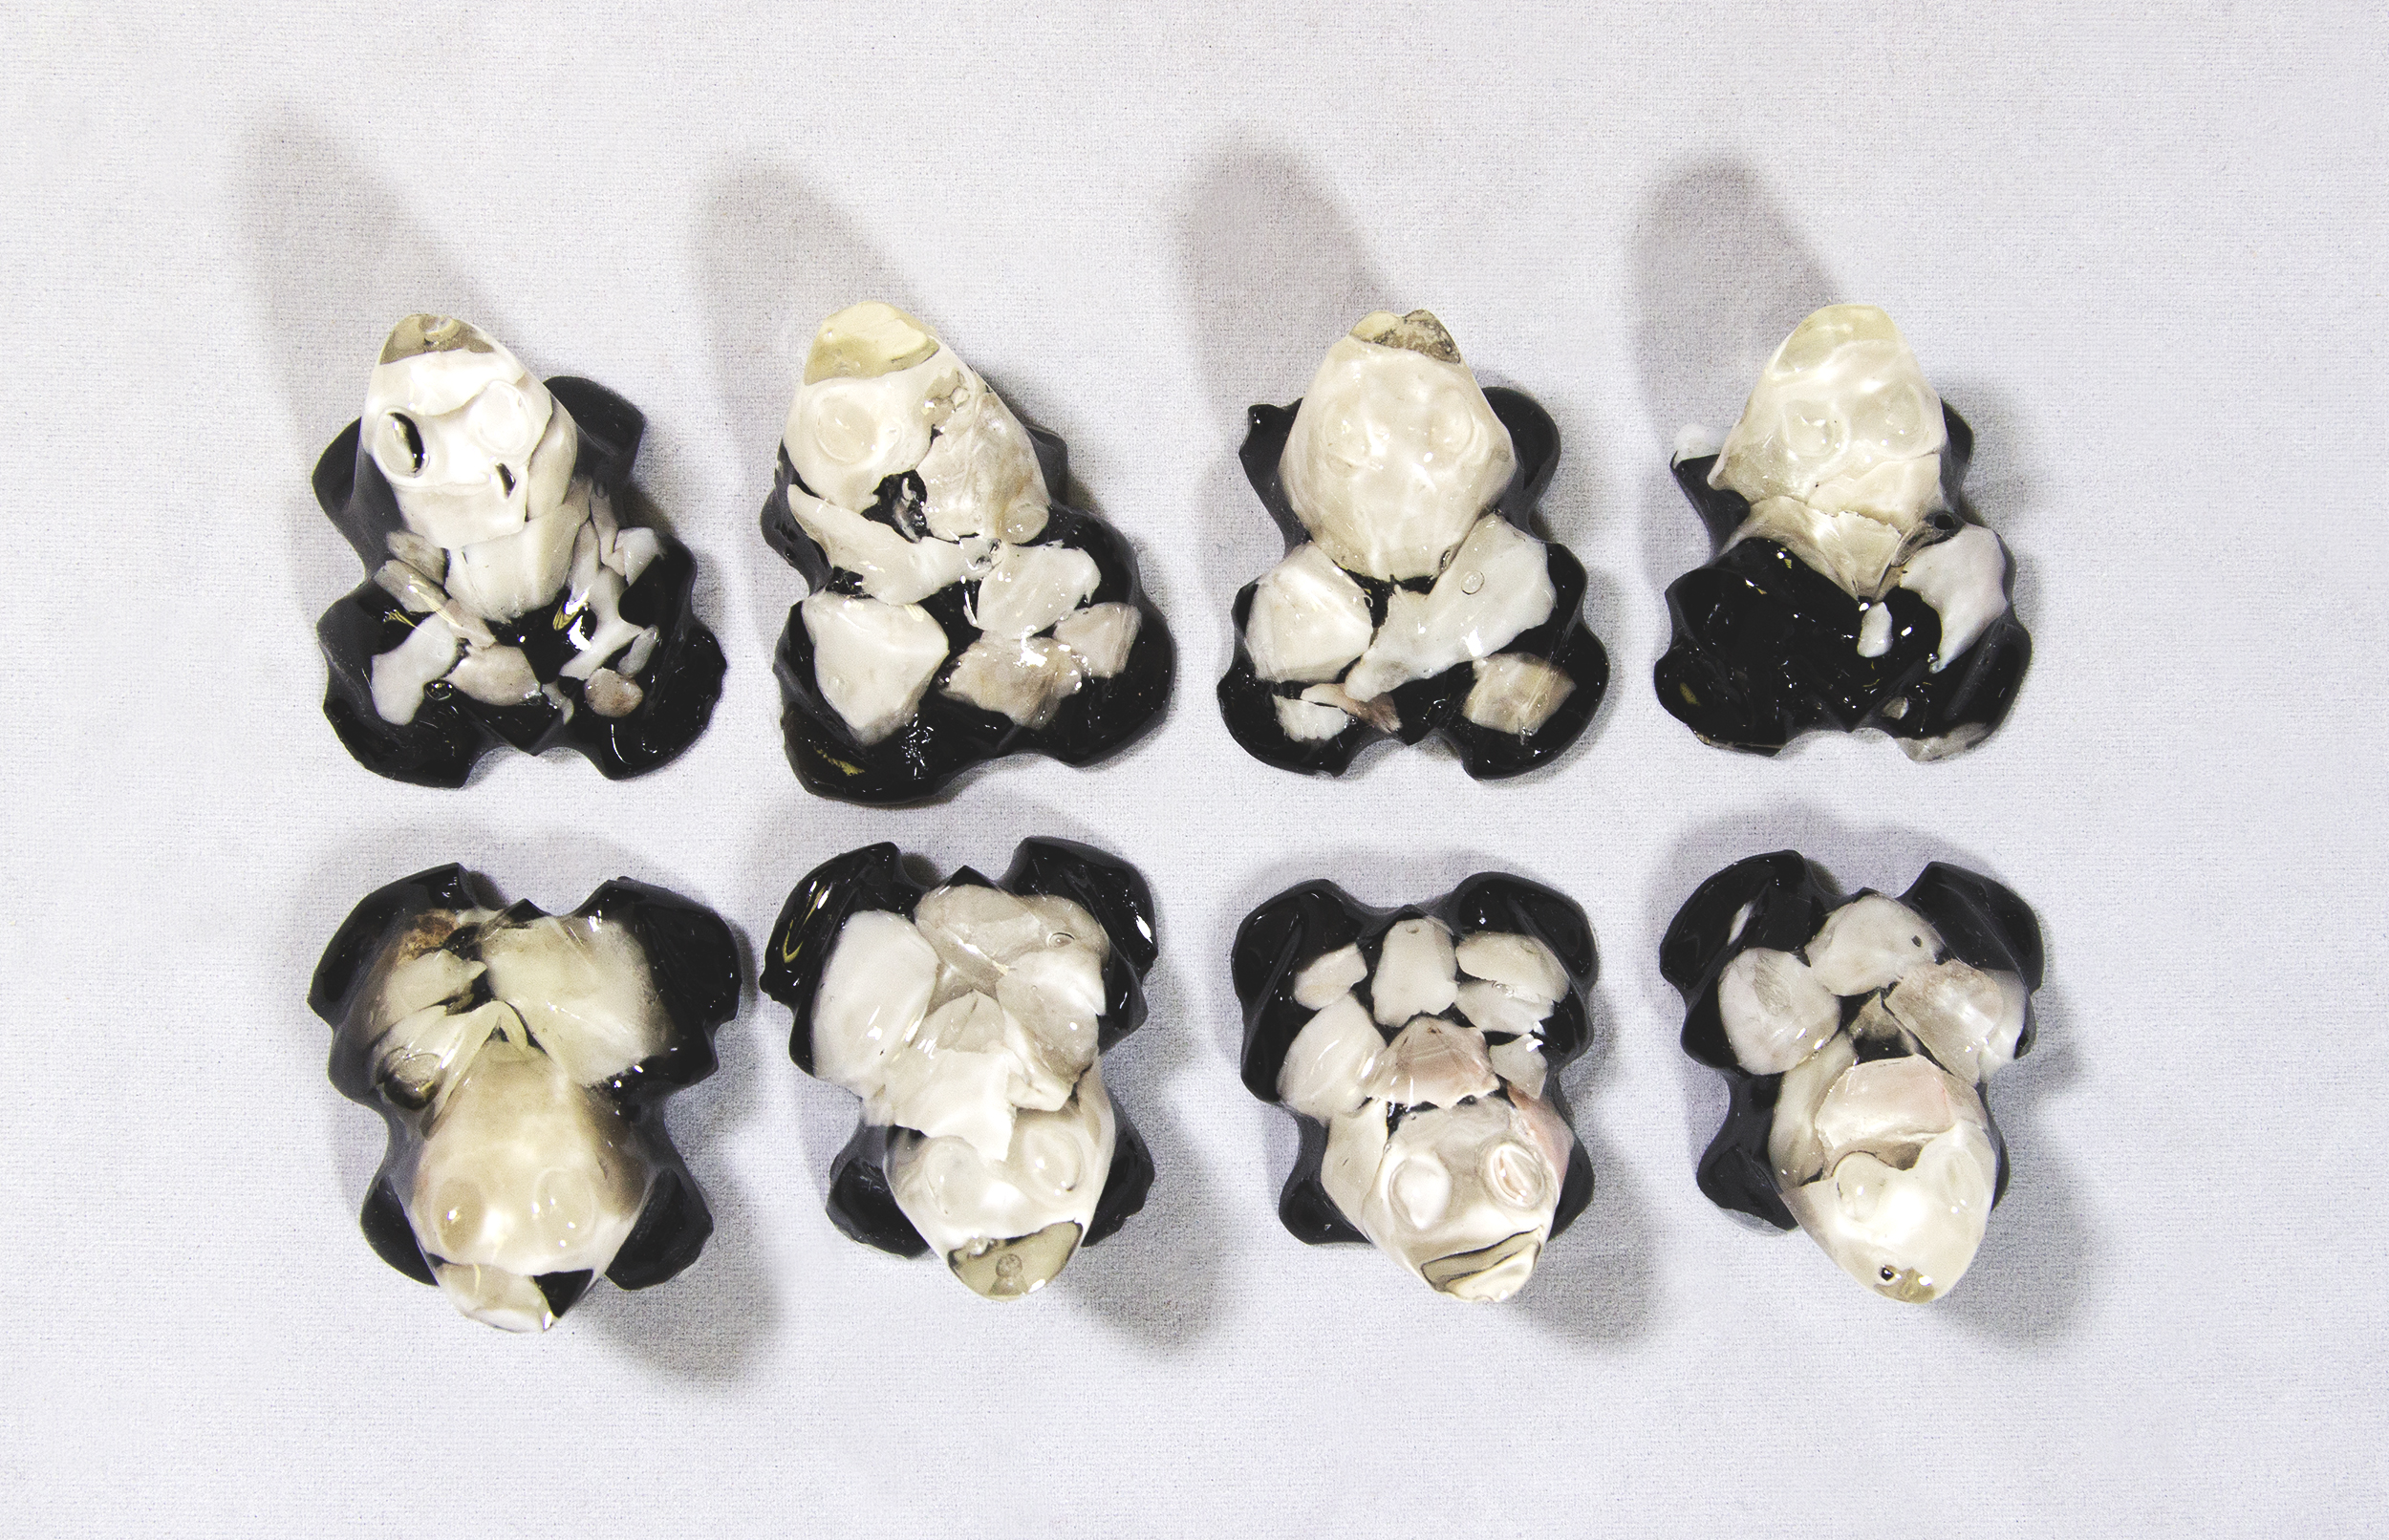 Set of Small White Precious Mineral Frog Figurines